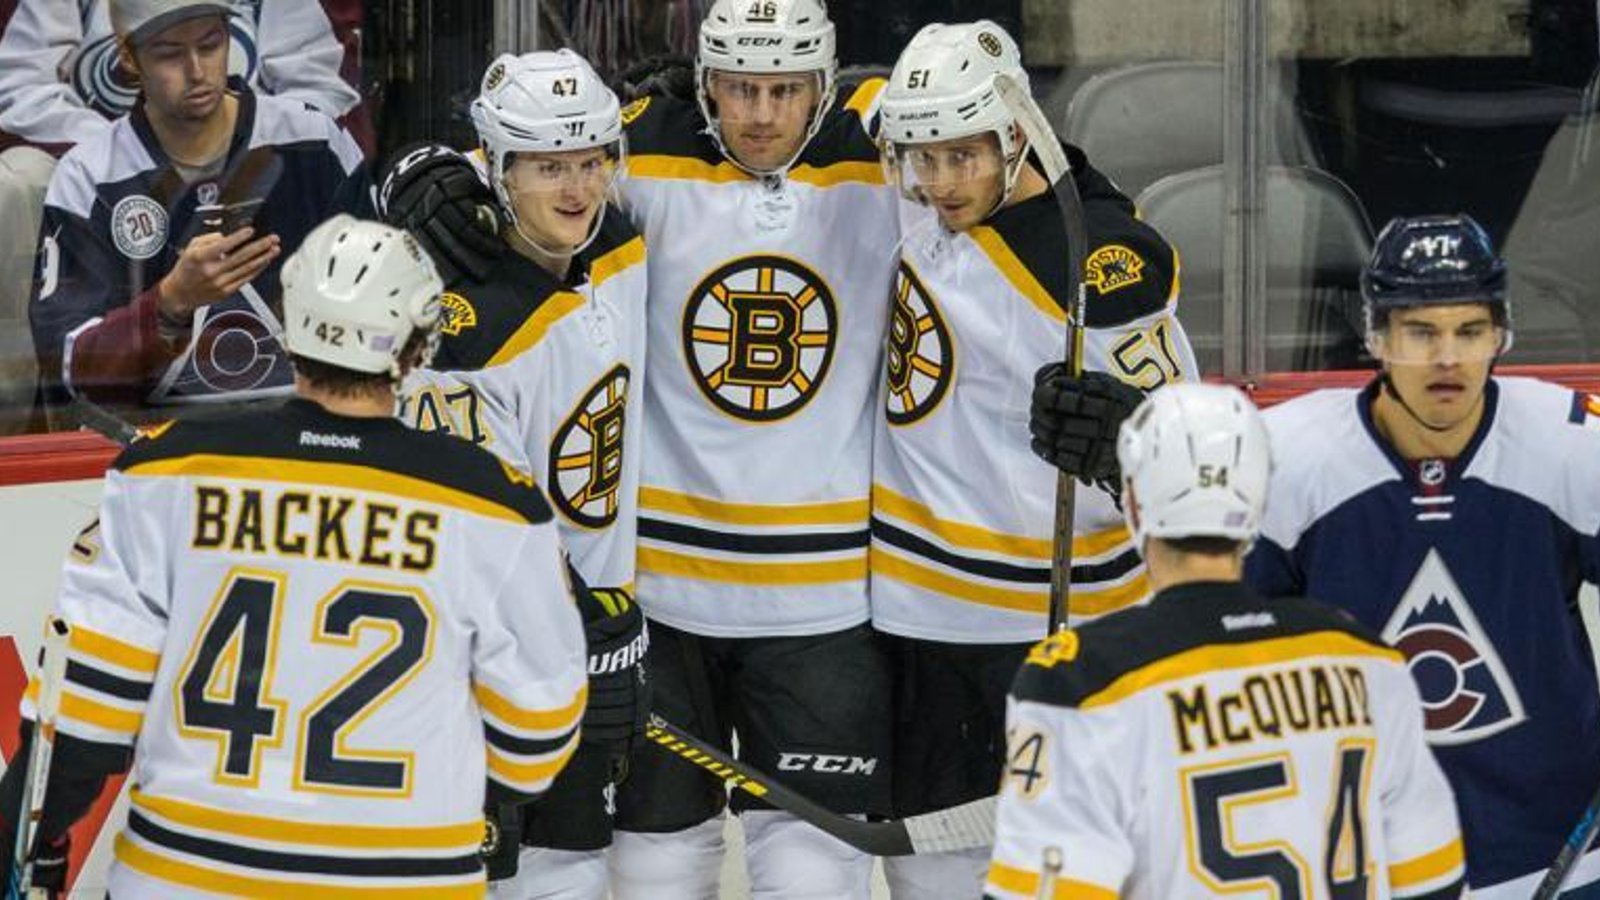 Report: Key Bruins player could return to lineup on Monday